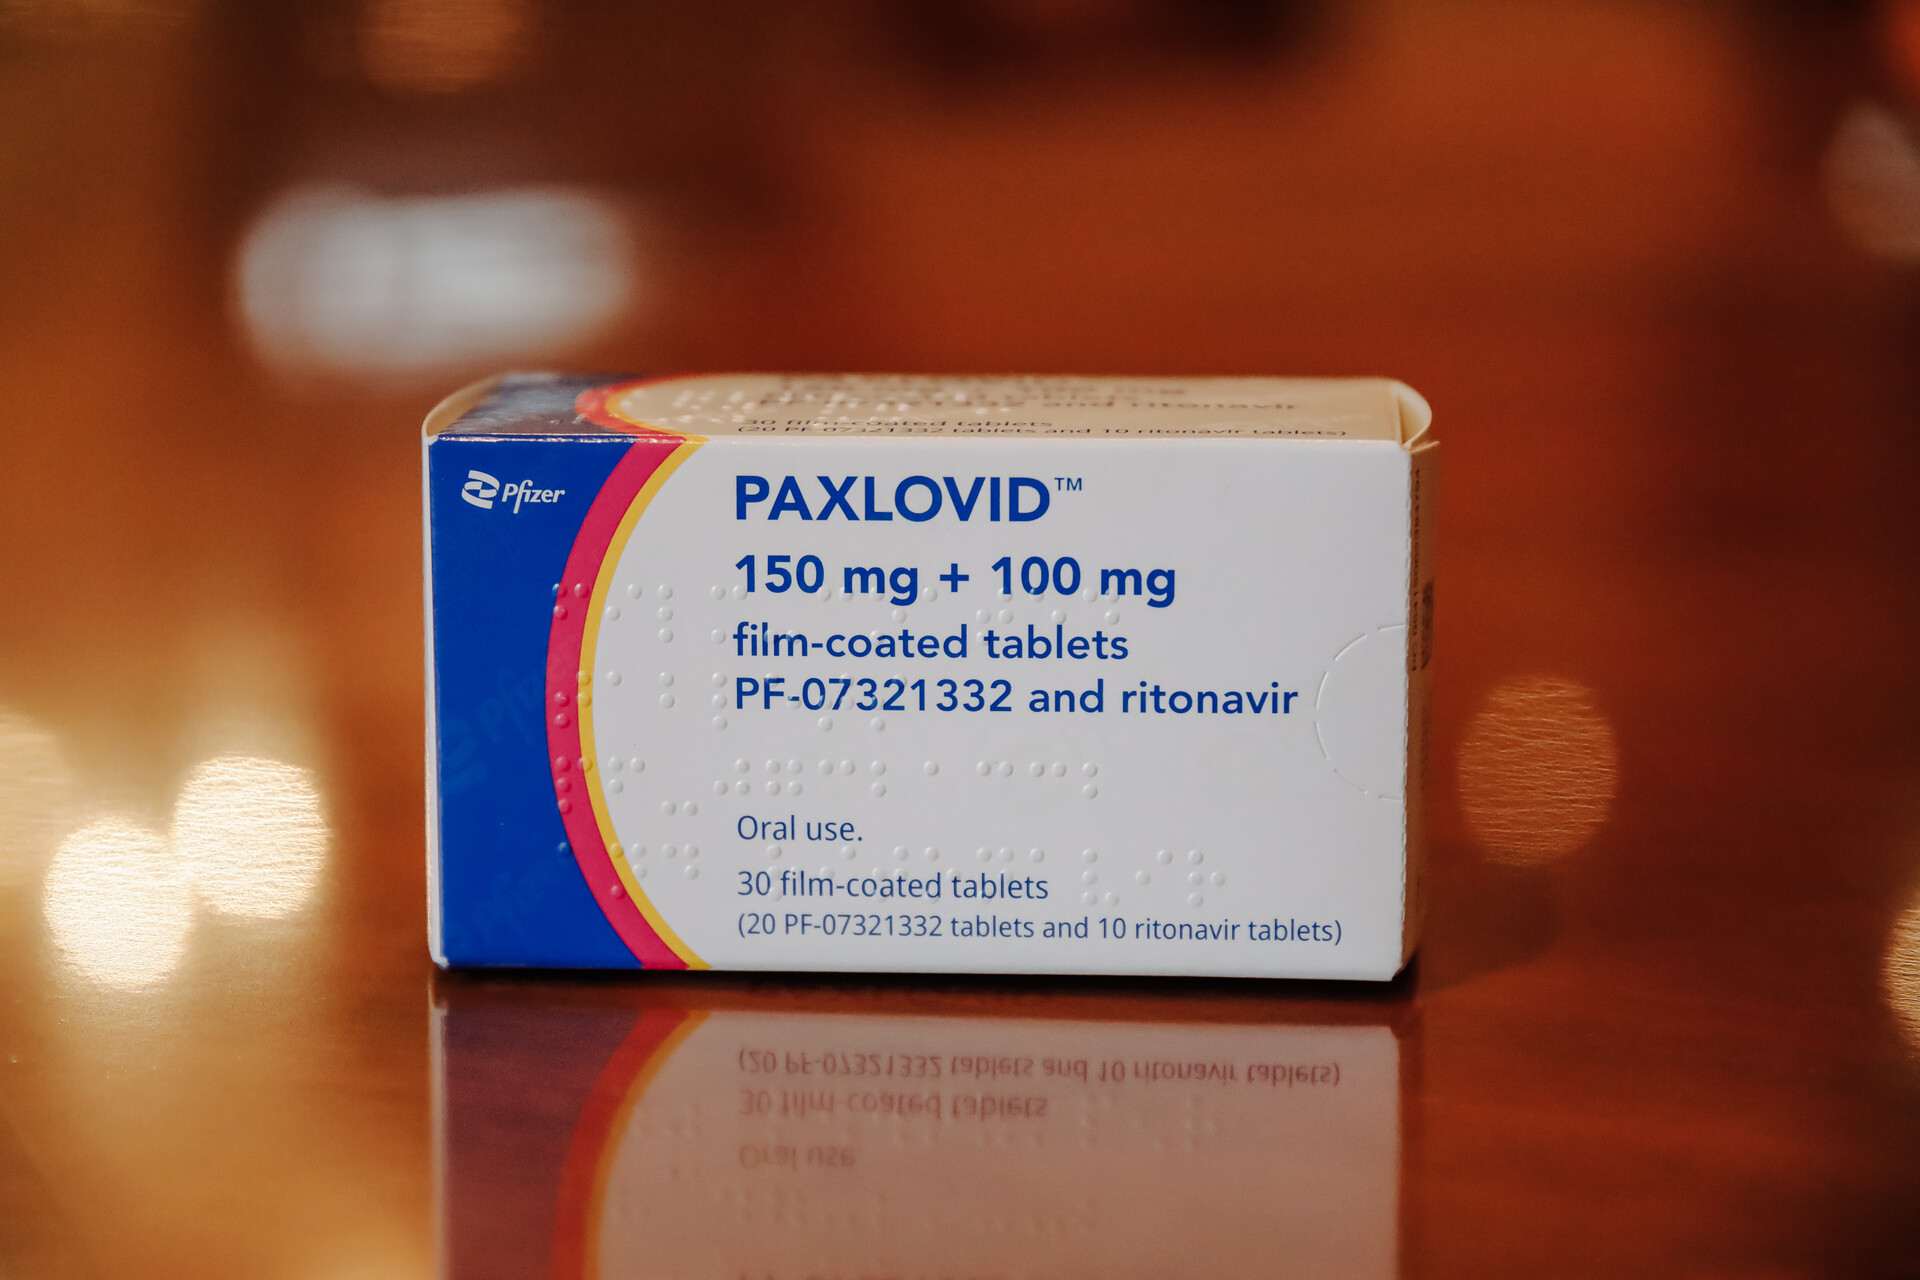 A box of the COVID antiviral drug Paxlovid, placed on a shiny wooden table. The box says 